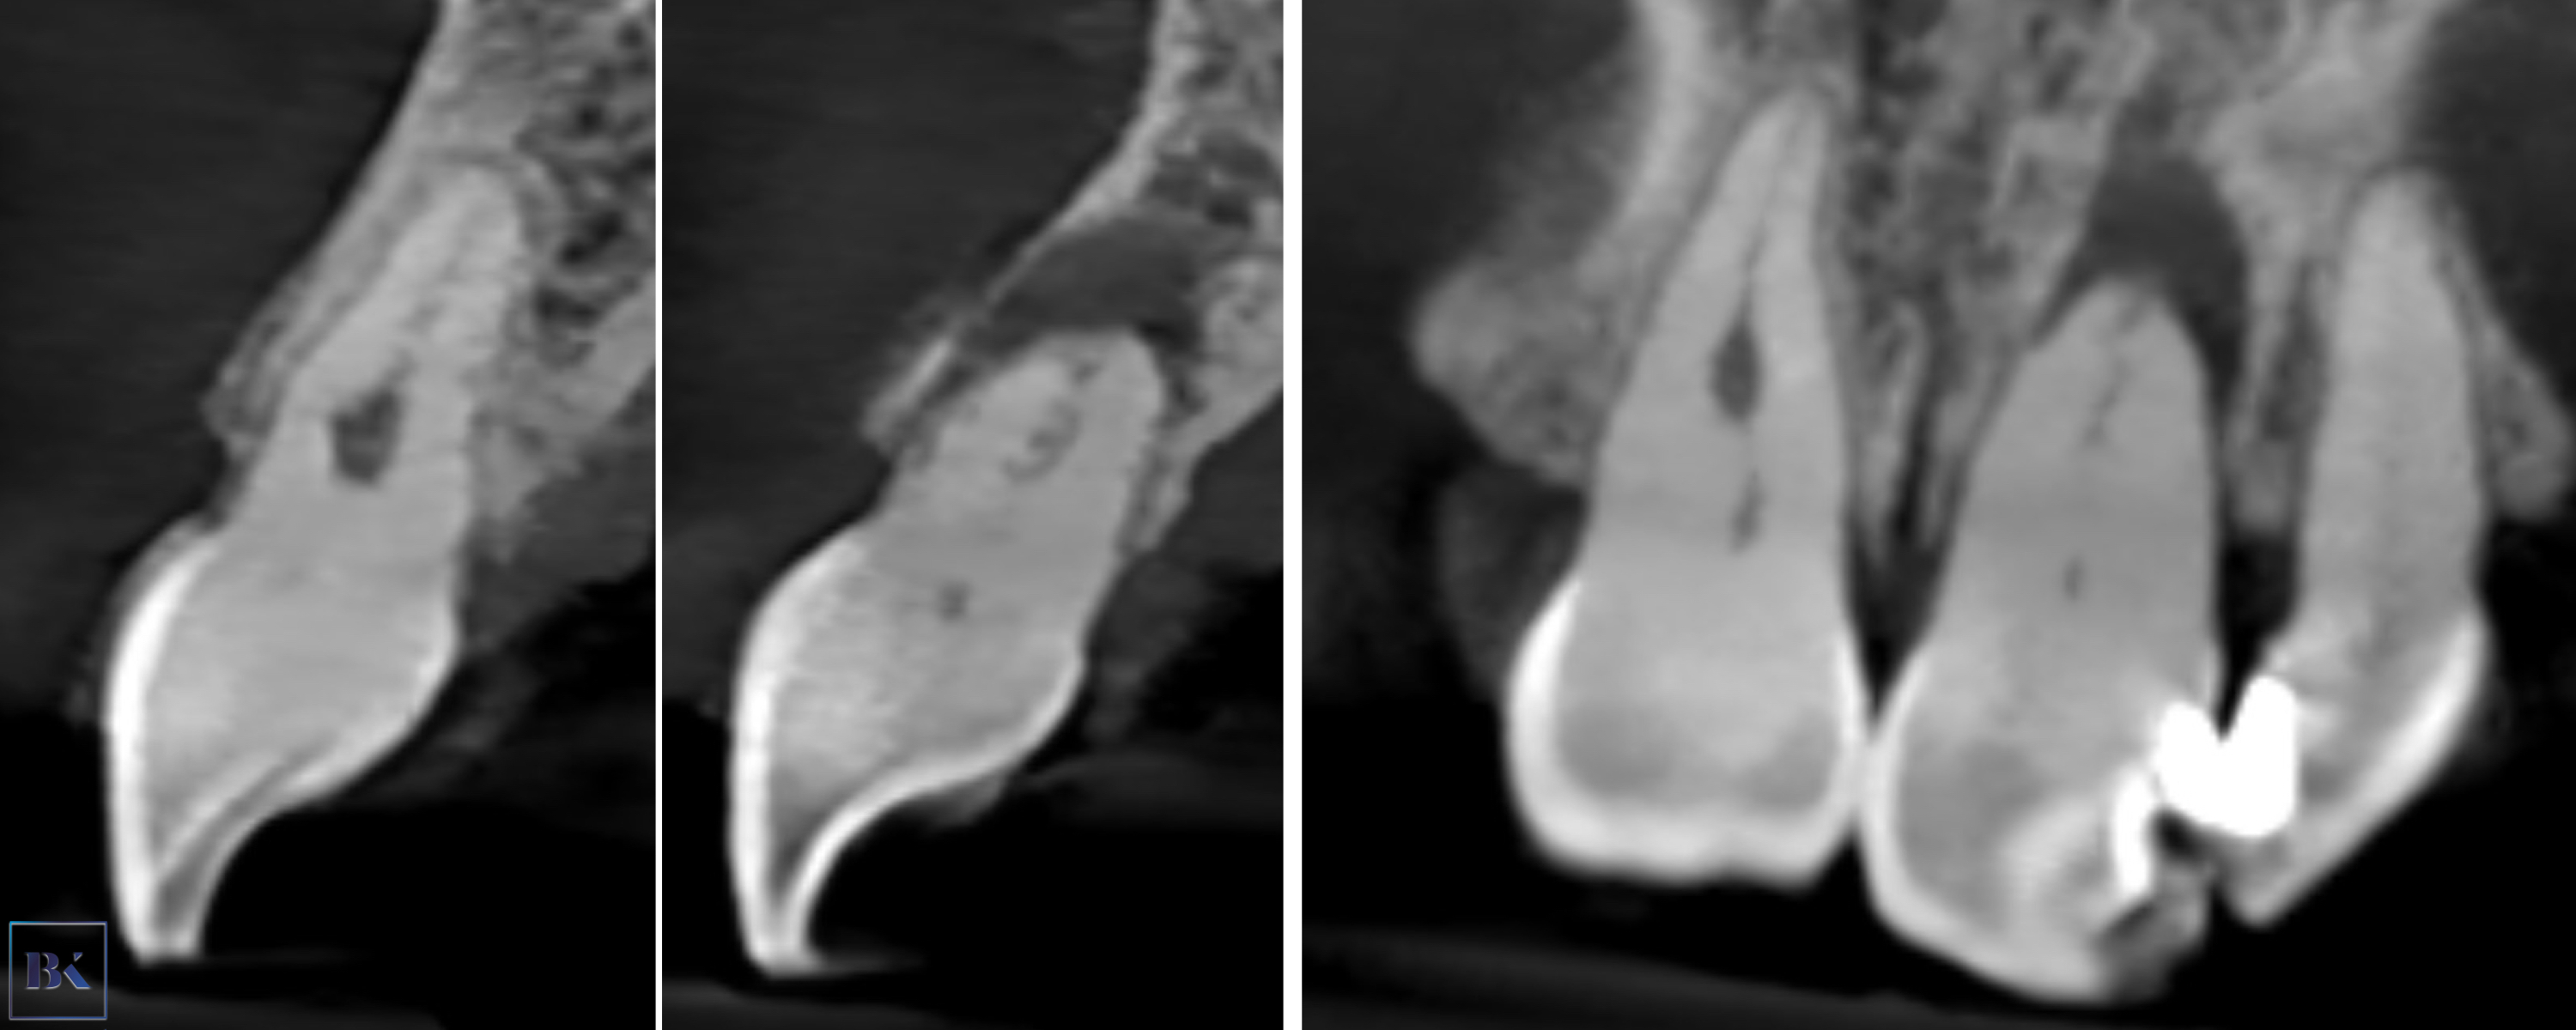 Figs. 15a–c: CBCT scan, sagittal (a & b) and coronal planes (c). Pulp canal obliteration was visible in both teeth, and a periapical lesion was present around the left incisor. Internal resorption in the right incisor was suspected.